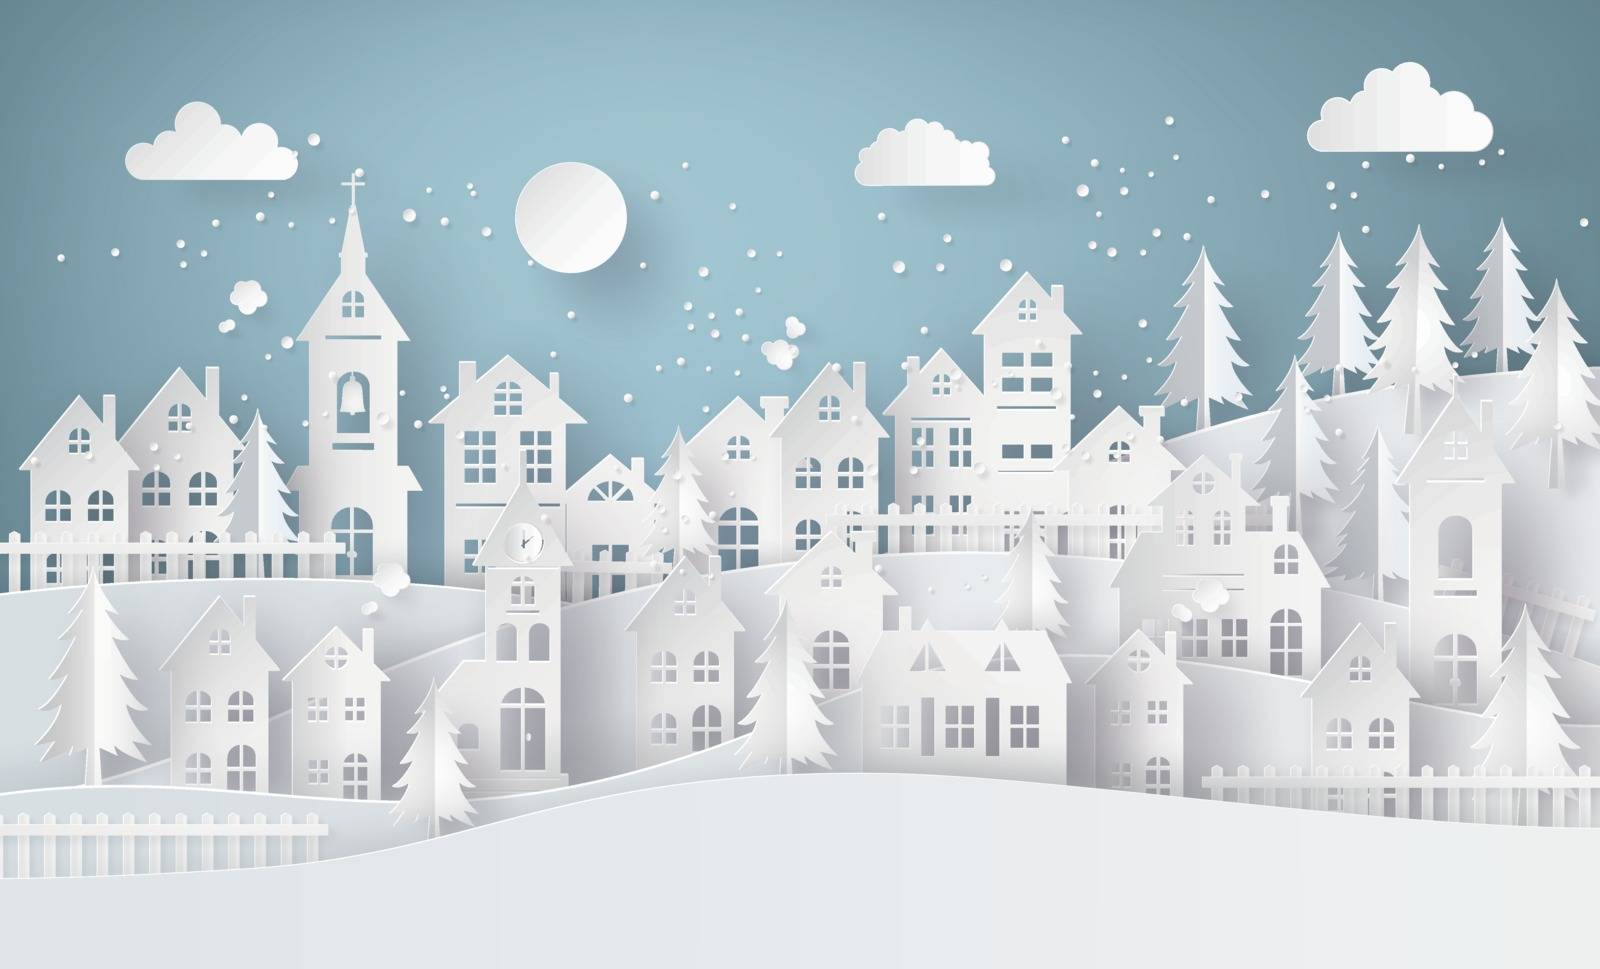 Winter Snow Urban Countryside Landscape City Village with full moon,paper art and craft style.